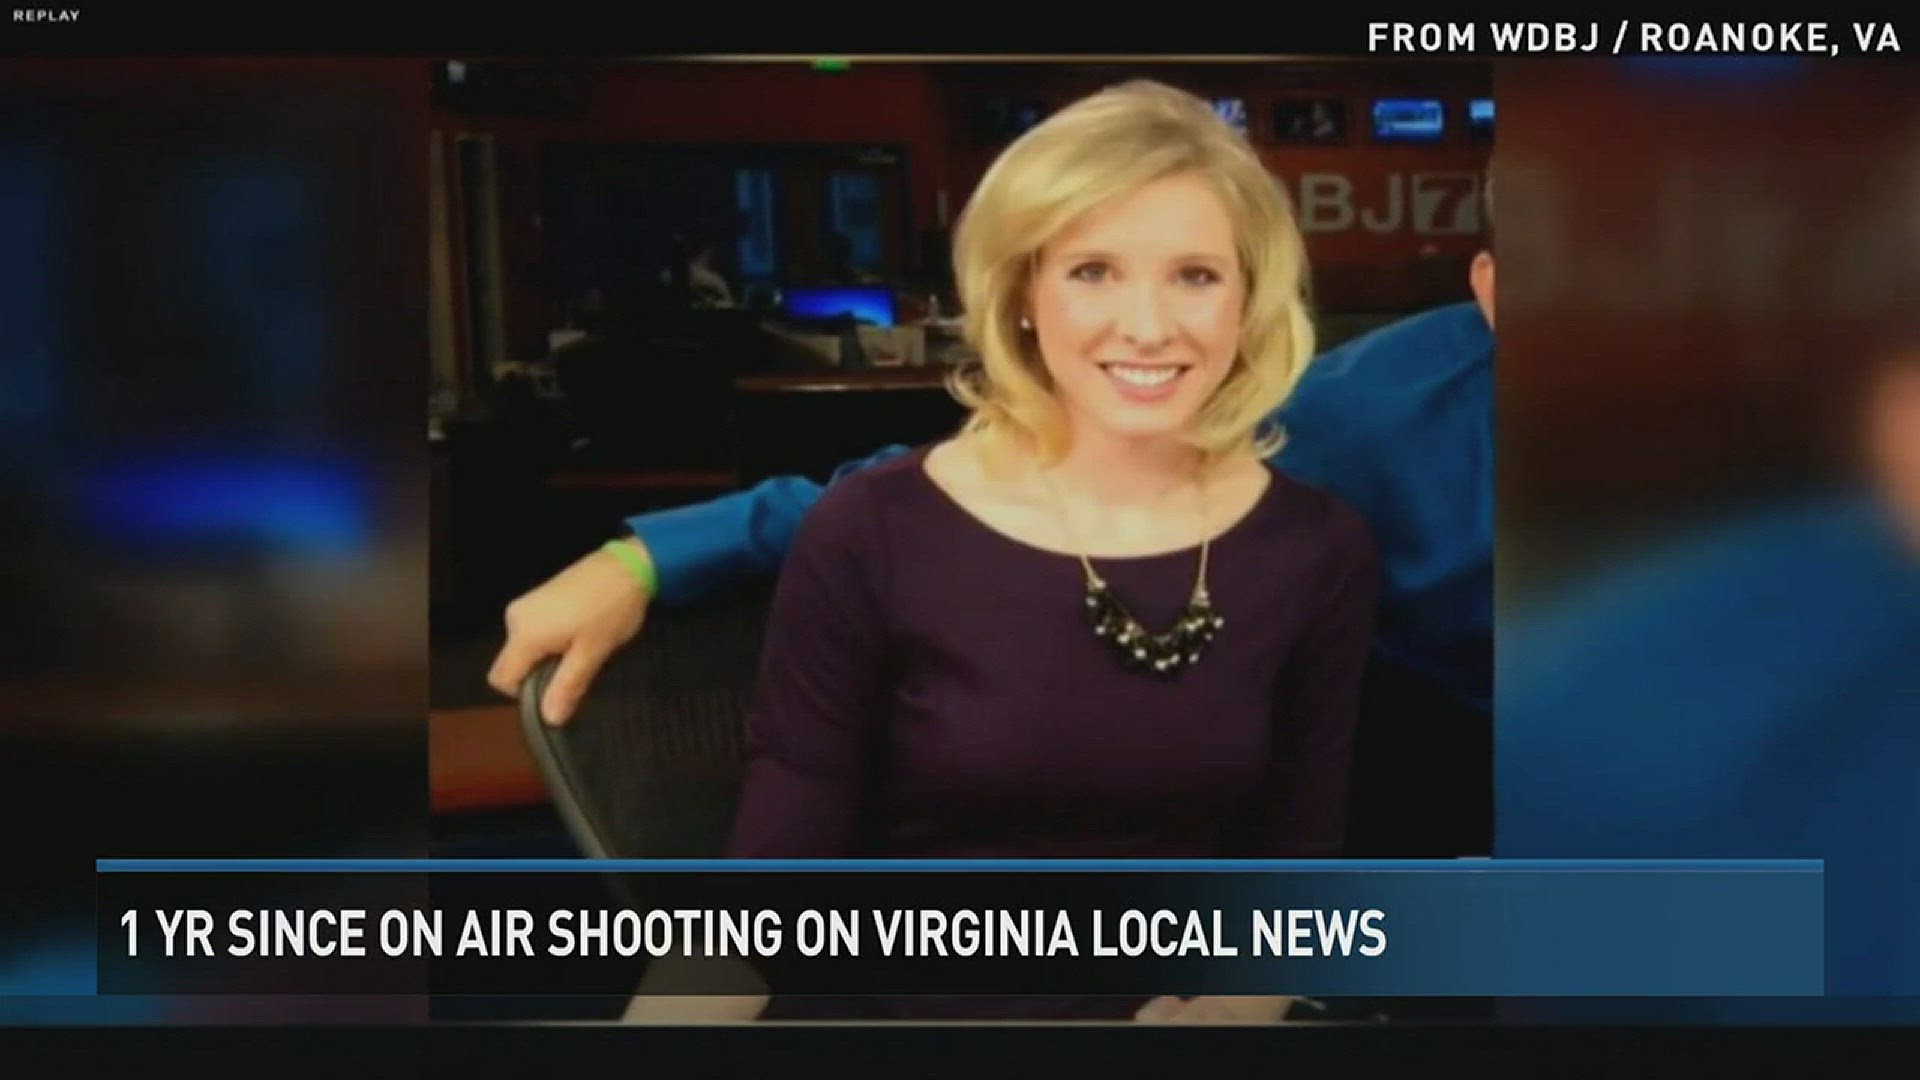 A Virginia television station is marking a year since two journalists were fatally shot during a live broadcast watched by thousands of viewers.